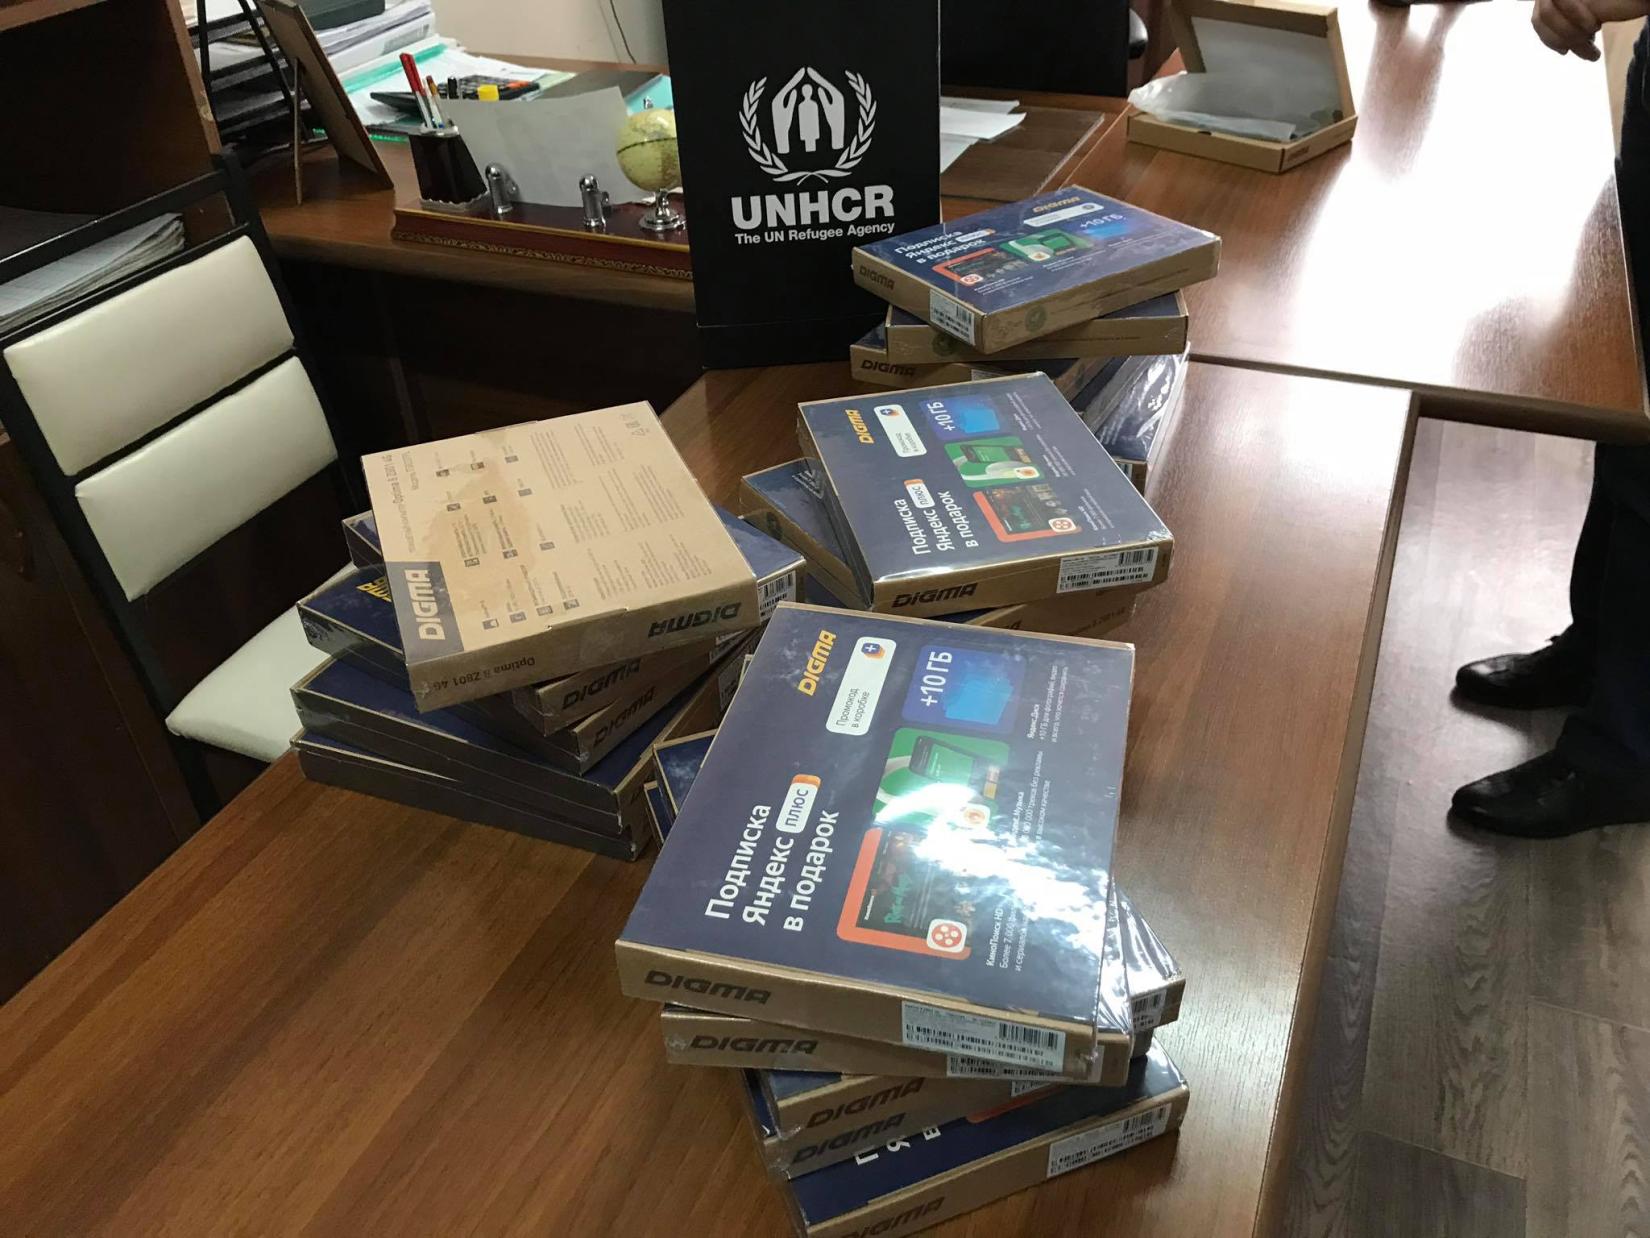 Tablets provided by UNHCR.